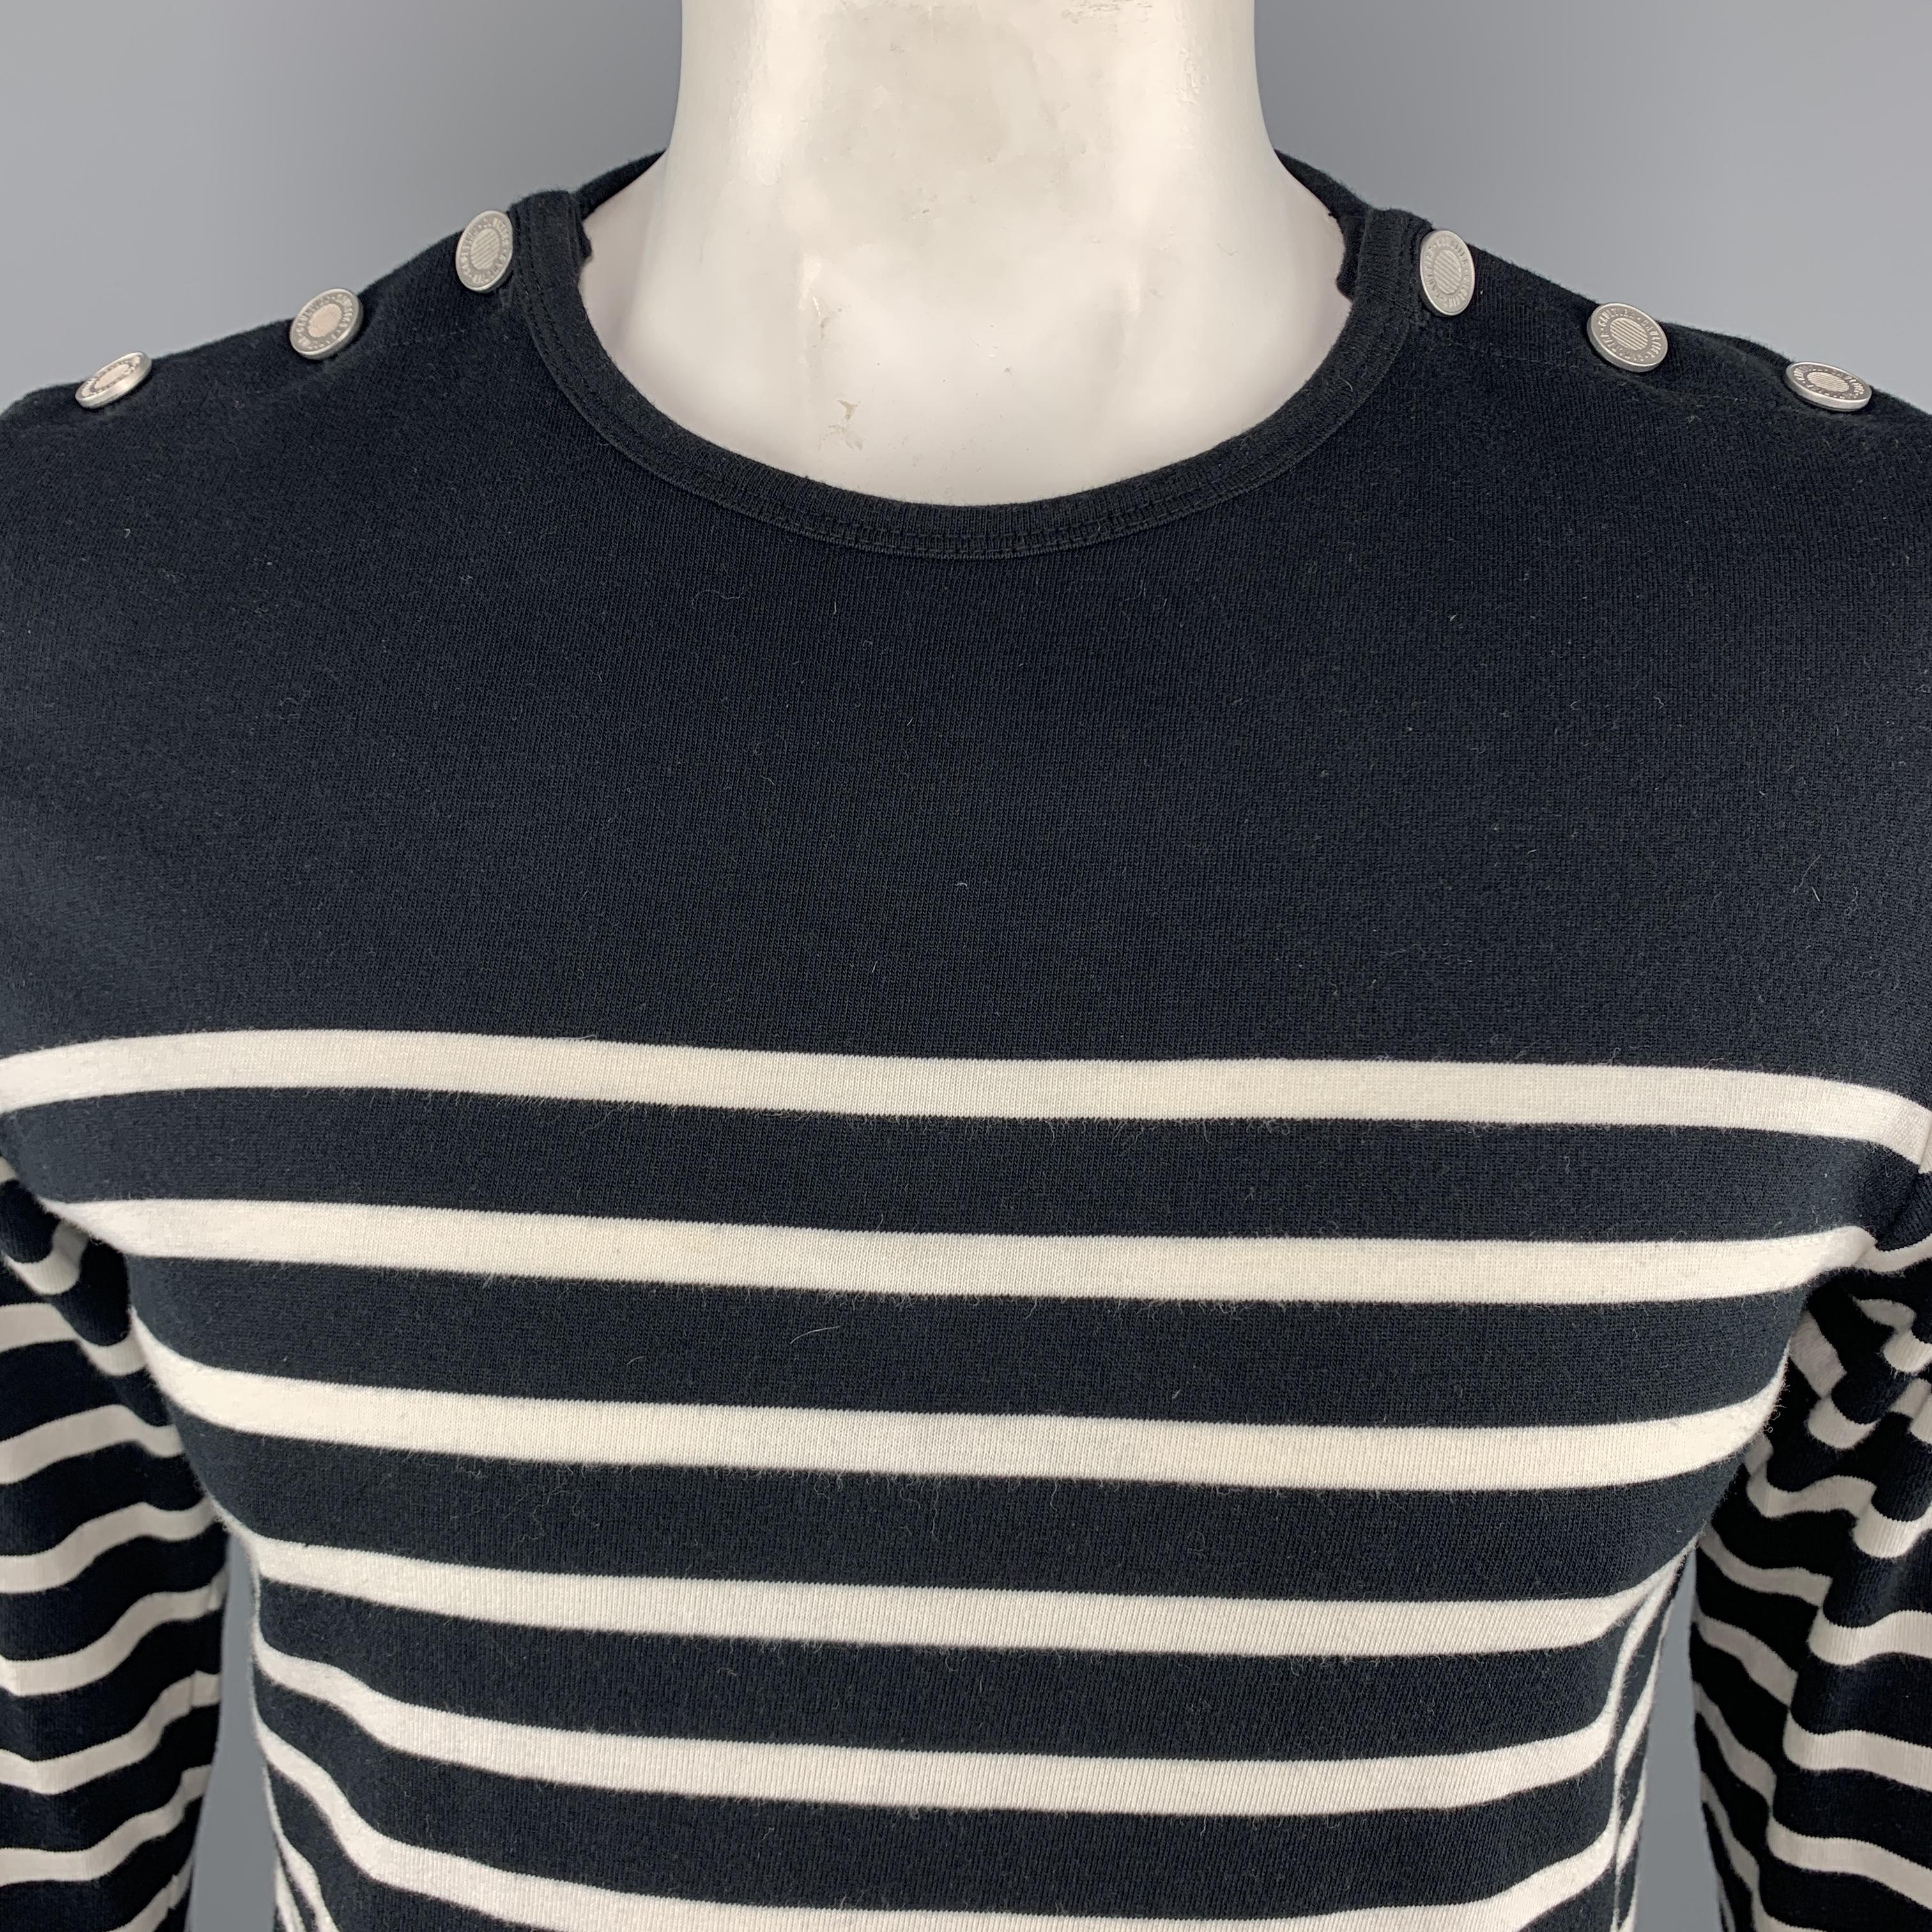 JEAN PAUL GAULTIER for OPENING CEREMONY / MATELOT Pullover Sweater comes in navy and white tones in a striped cotton material, with a buttoned collar, silver tone metal buttons and long sleeves.
 
Excellent Pre-Owned Condition.
Marked: L
